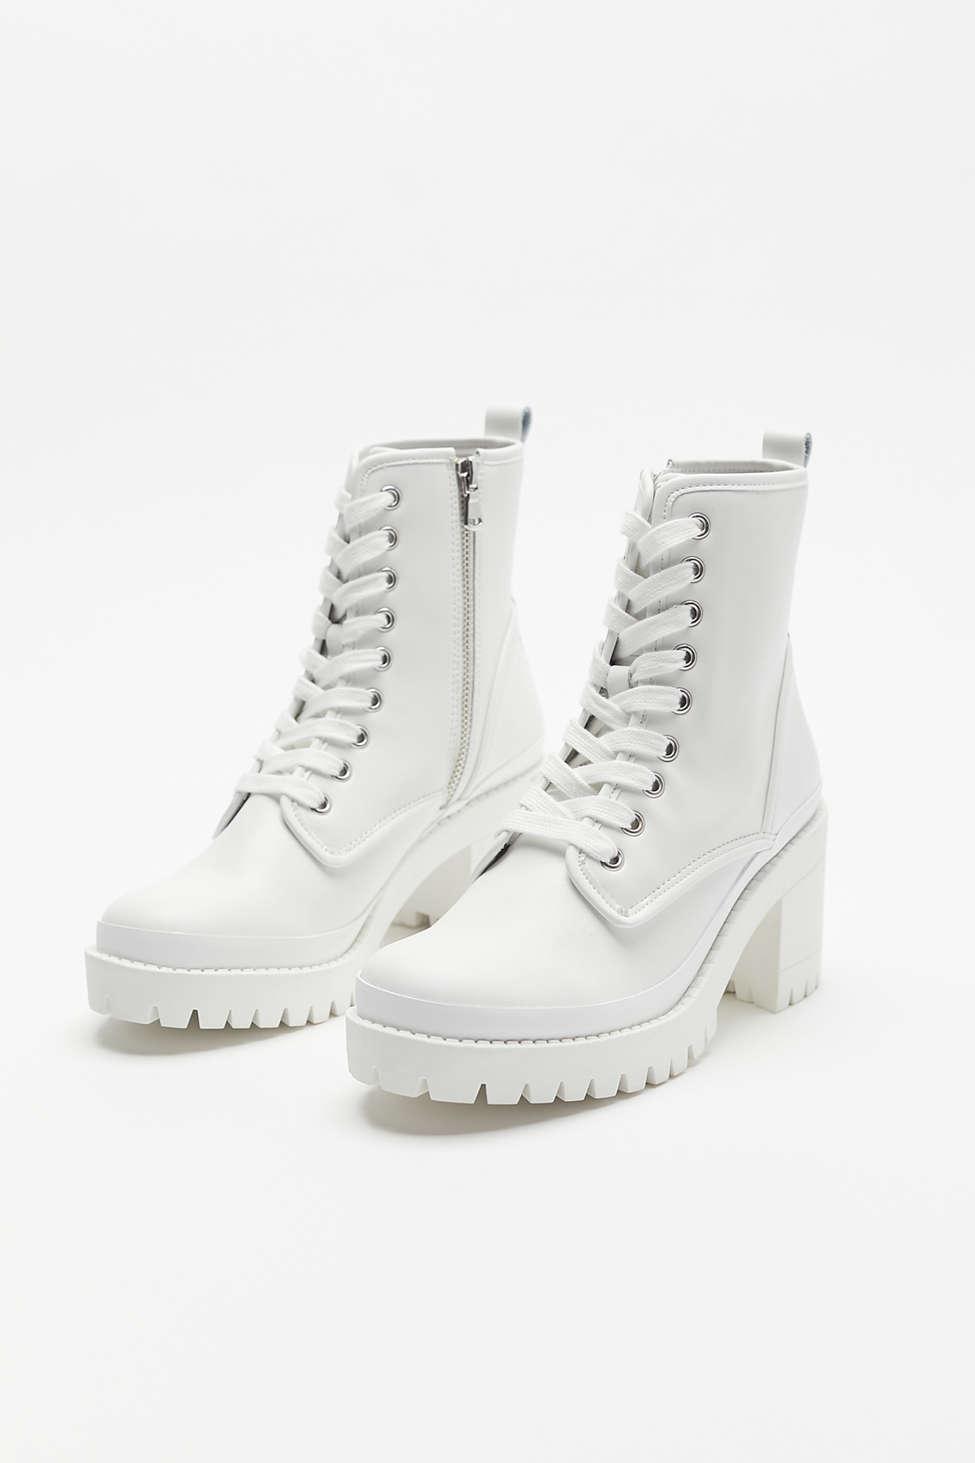 Steve Madden Bloomed Lace-up Boot in White - Lyst